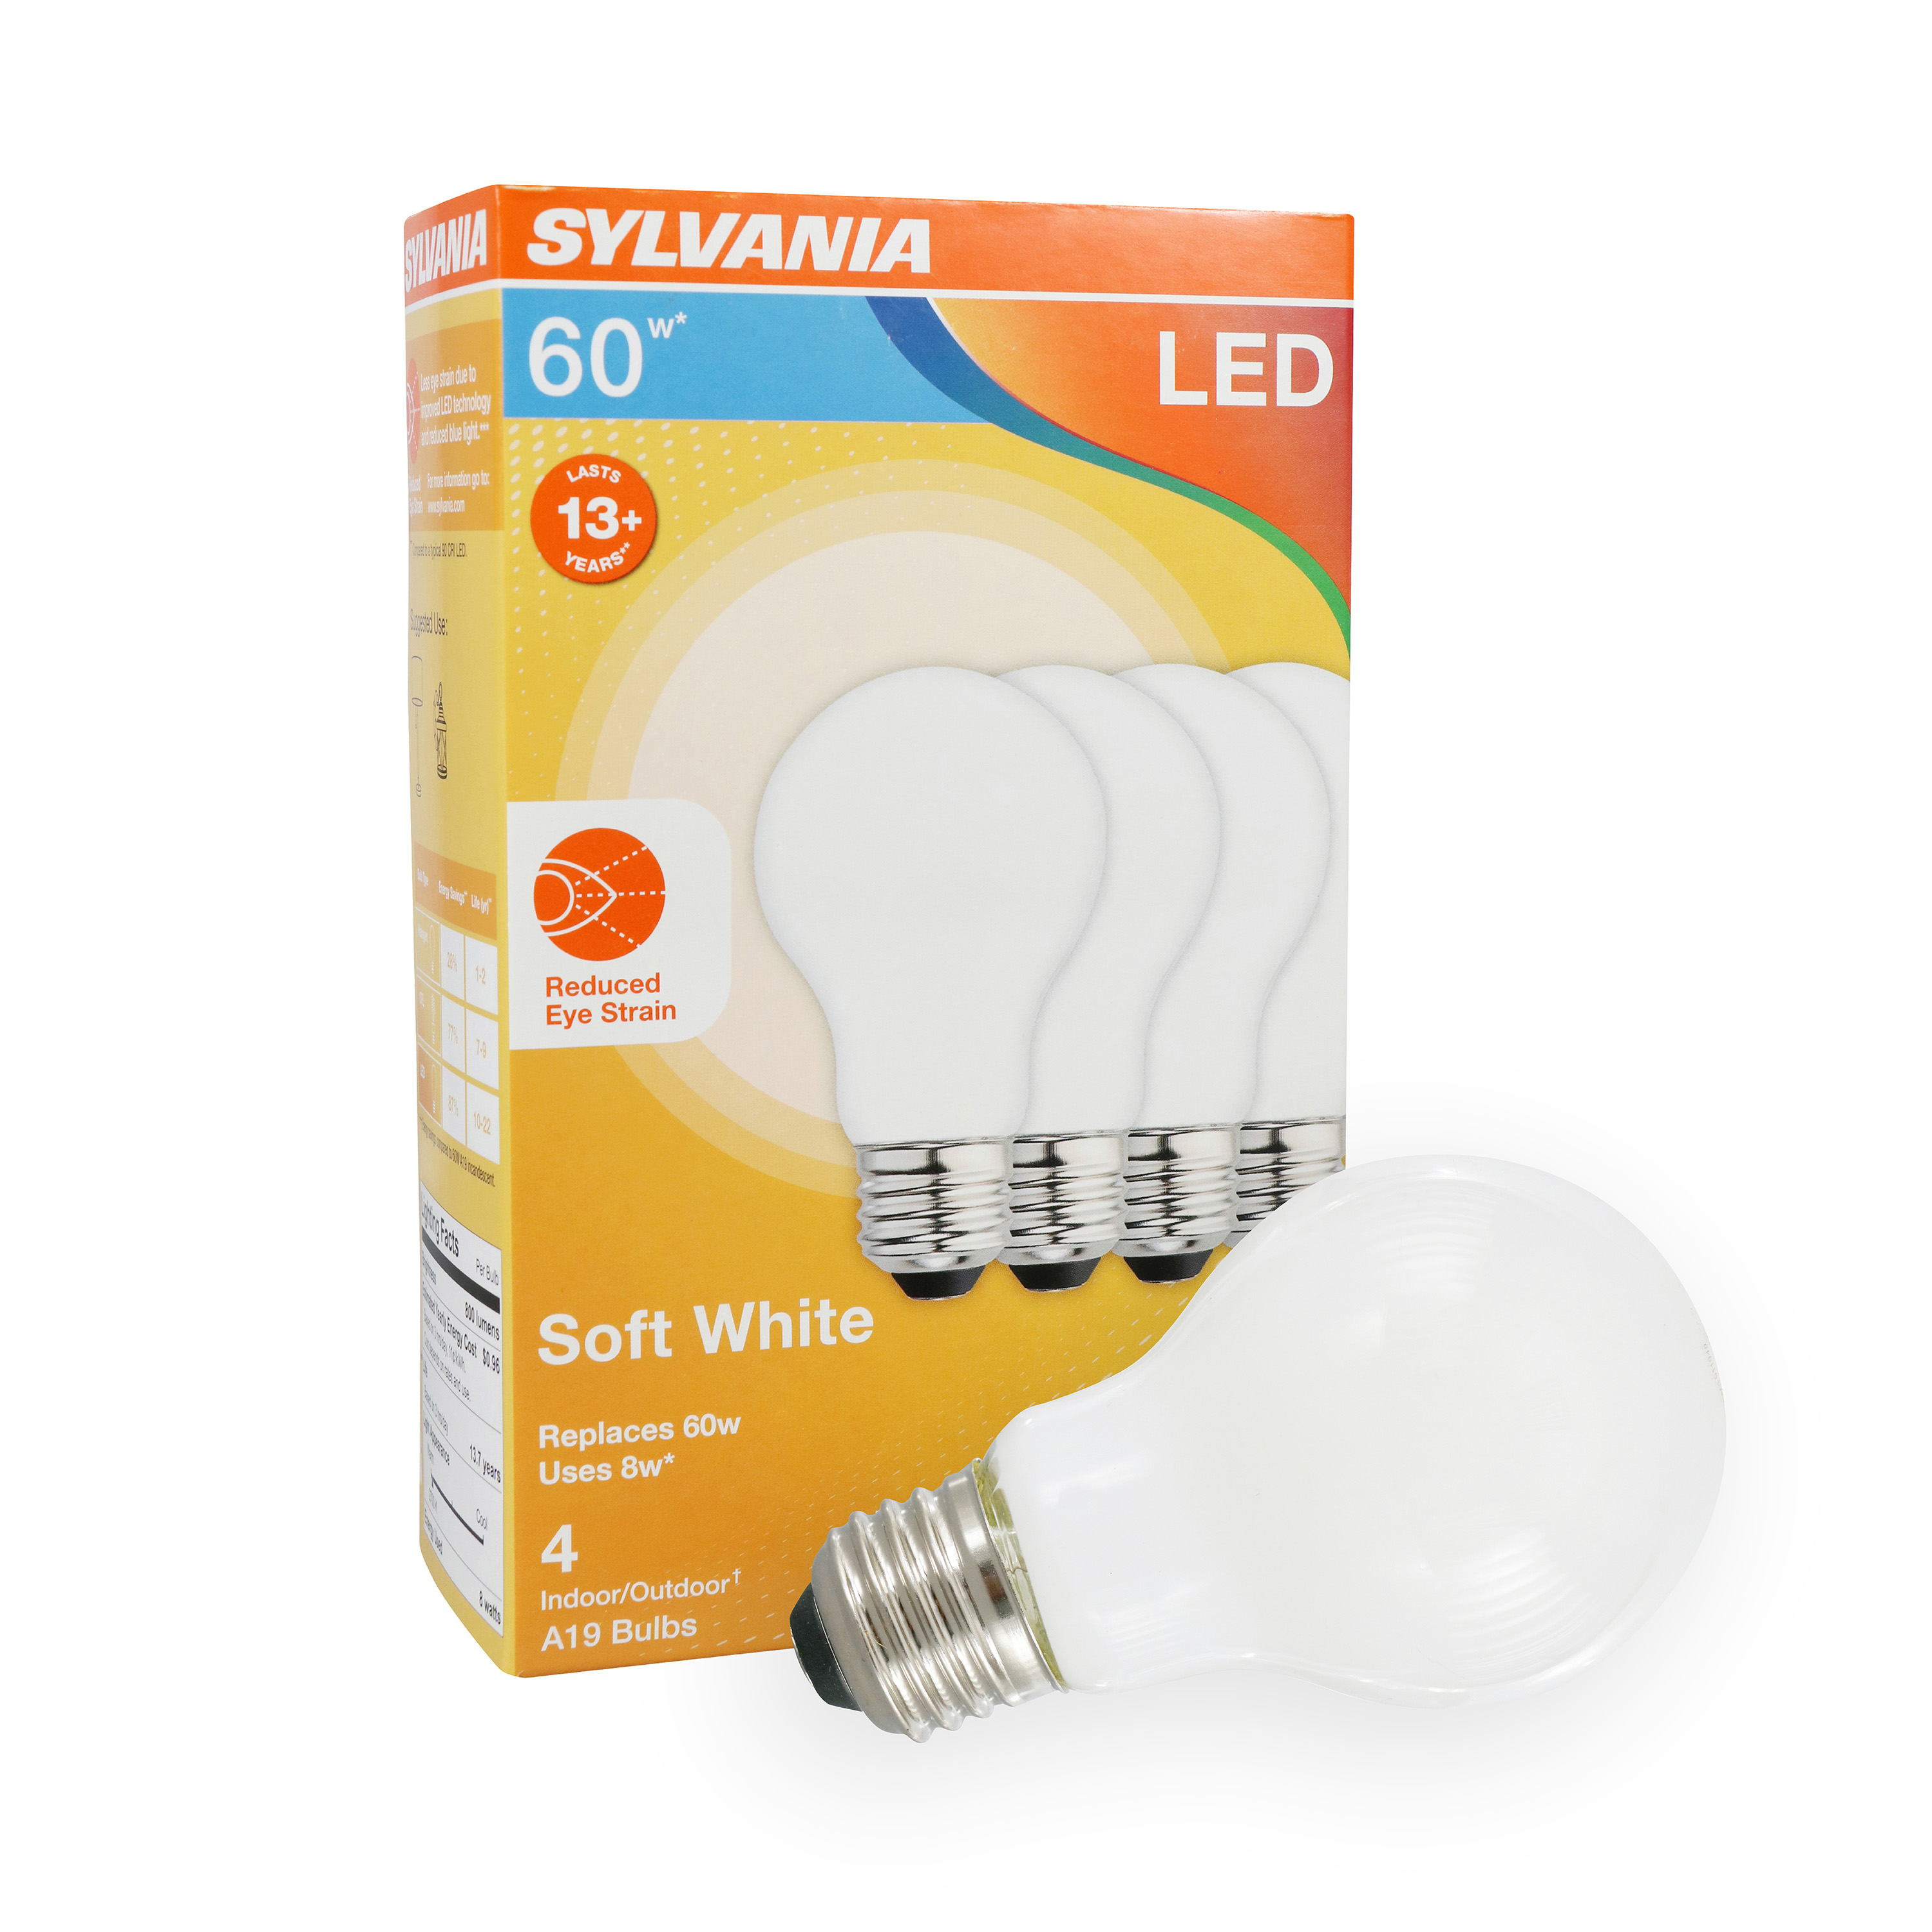 Sylvania 60W Led Light Bulbs - 4 pack for 0.97 at Walmart - YMMV based on location